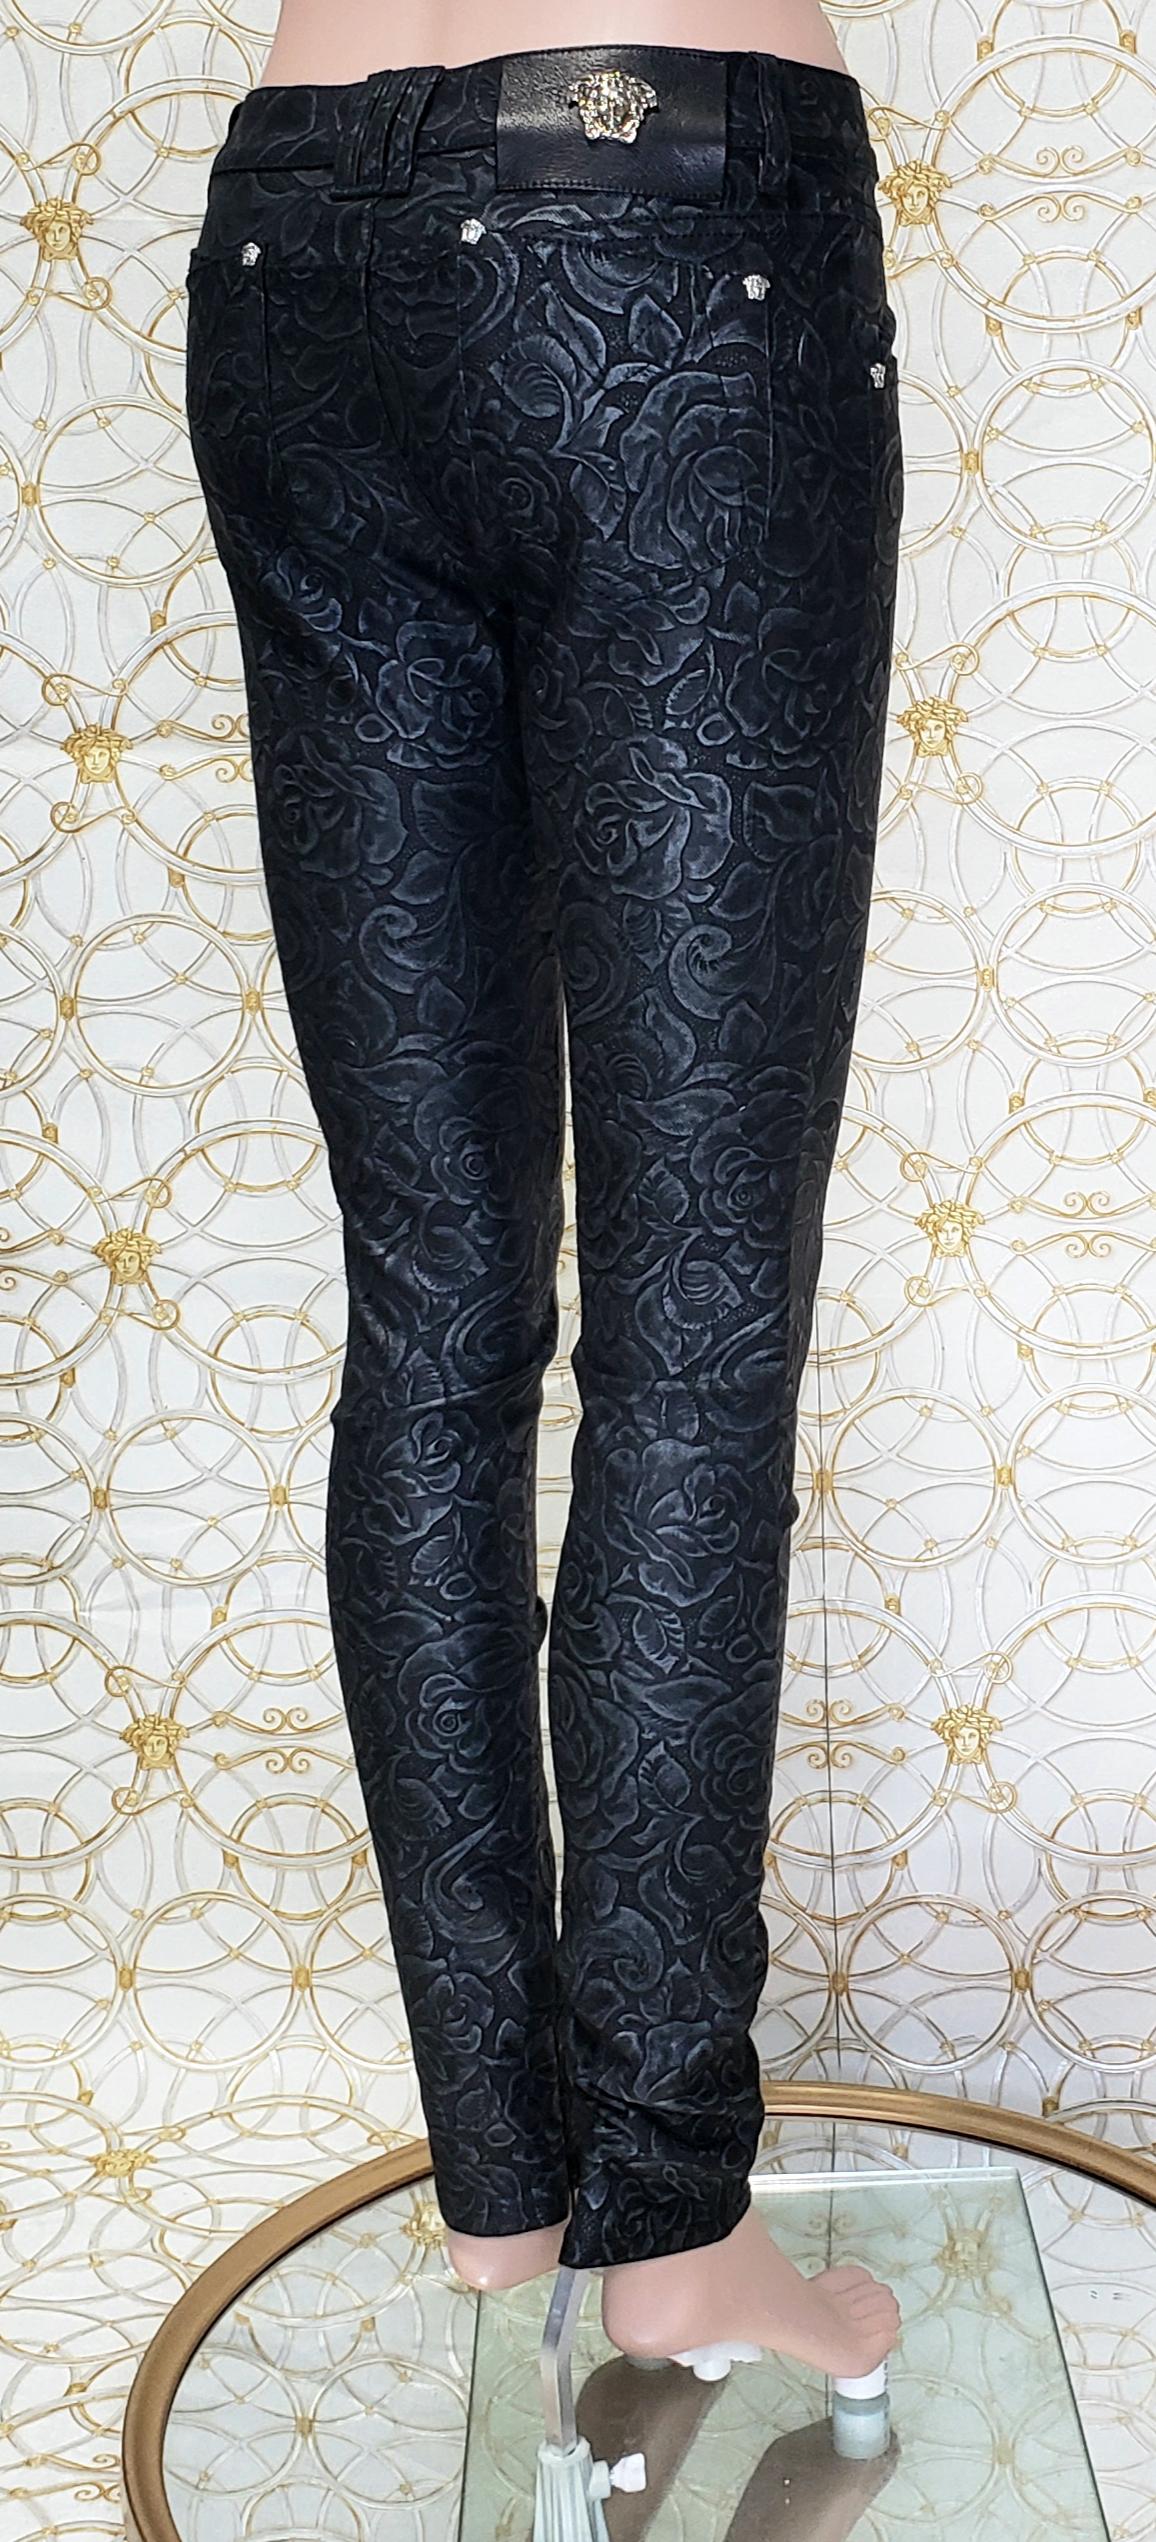 S/S 2014 Look # 5 VERSACE BLACK FLORAL JEANS PANTS size 26 In New Condition For Sale In Montgomery, TX